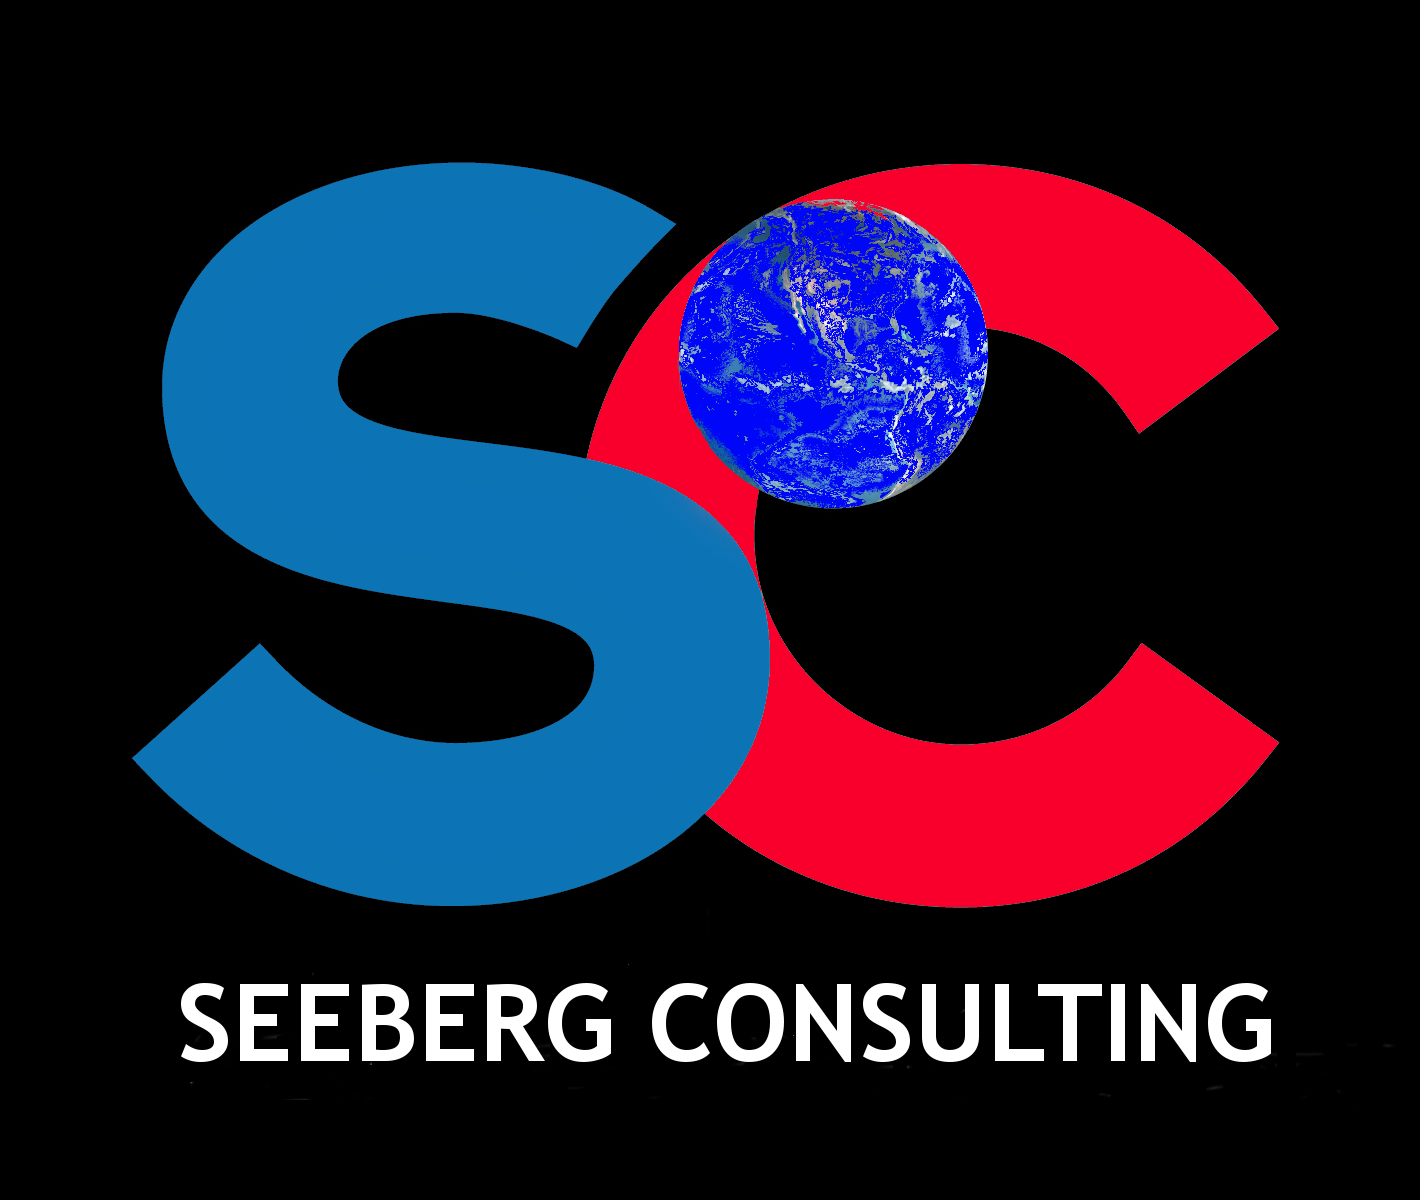 Seeberg Consulting